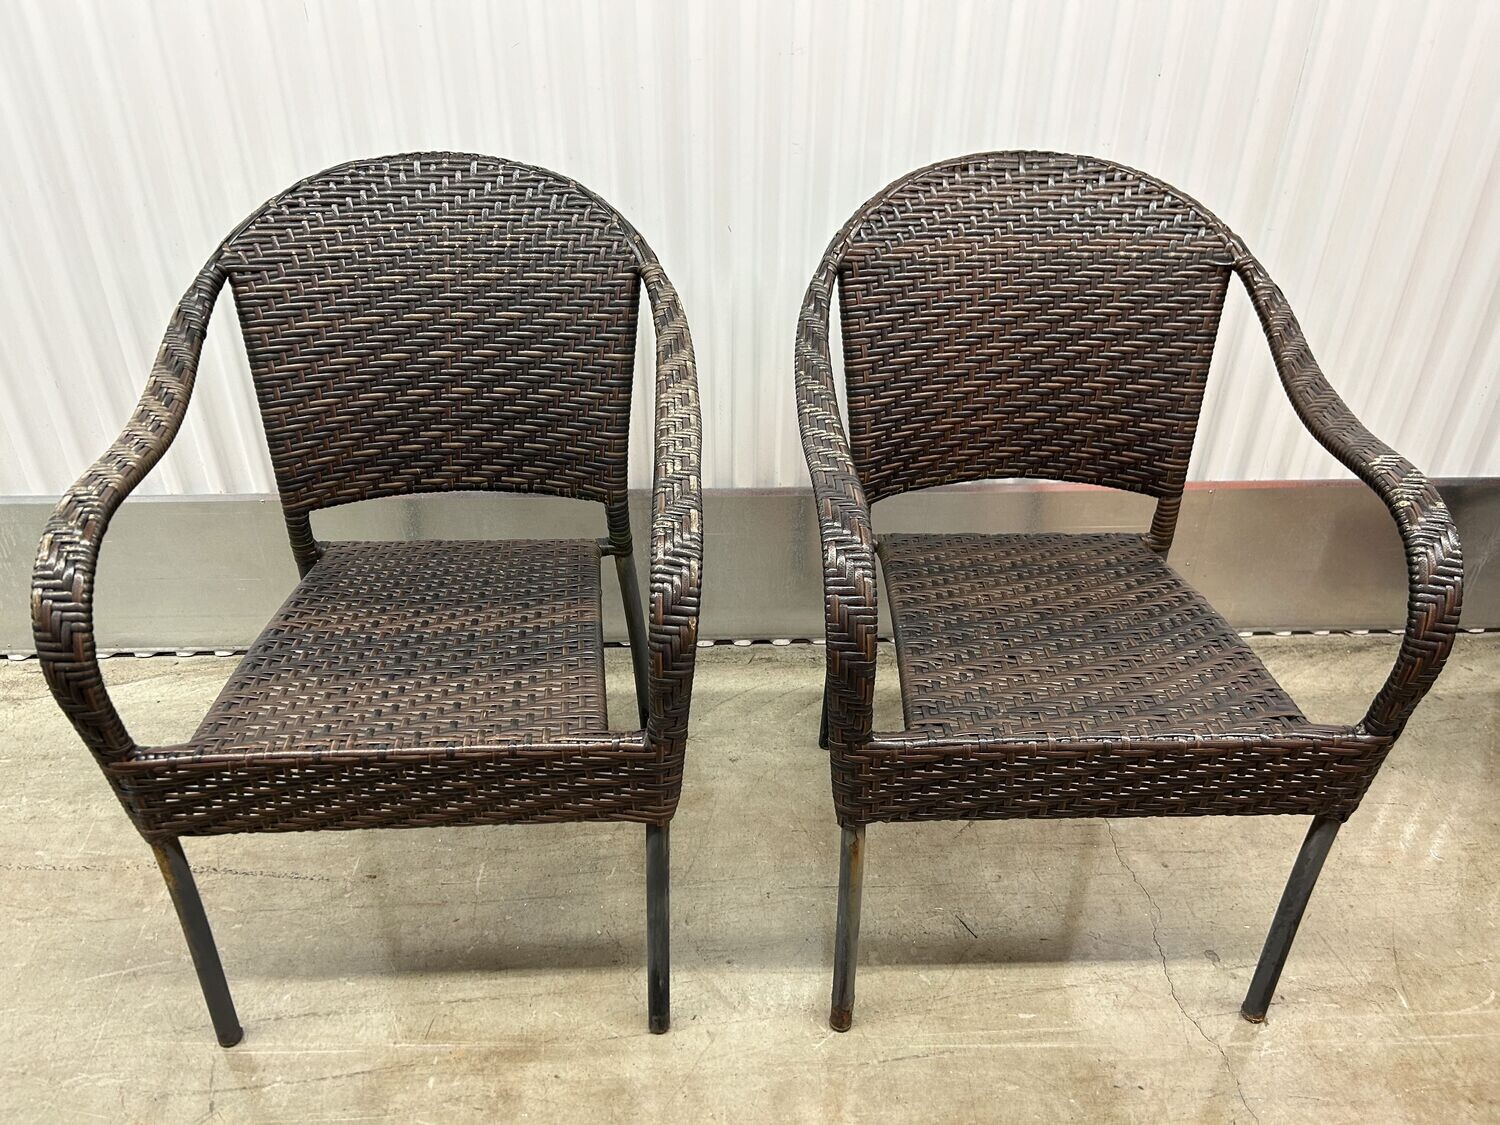 2 Patio Chairs, need touch-ups #2009